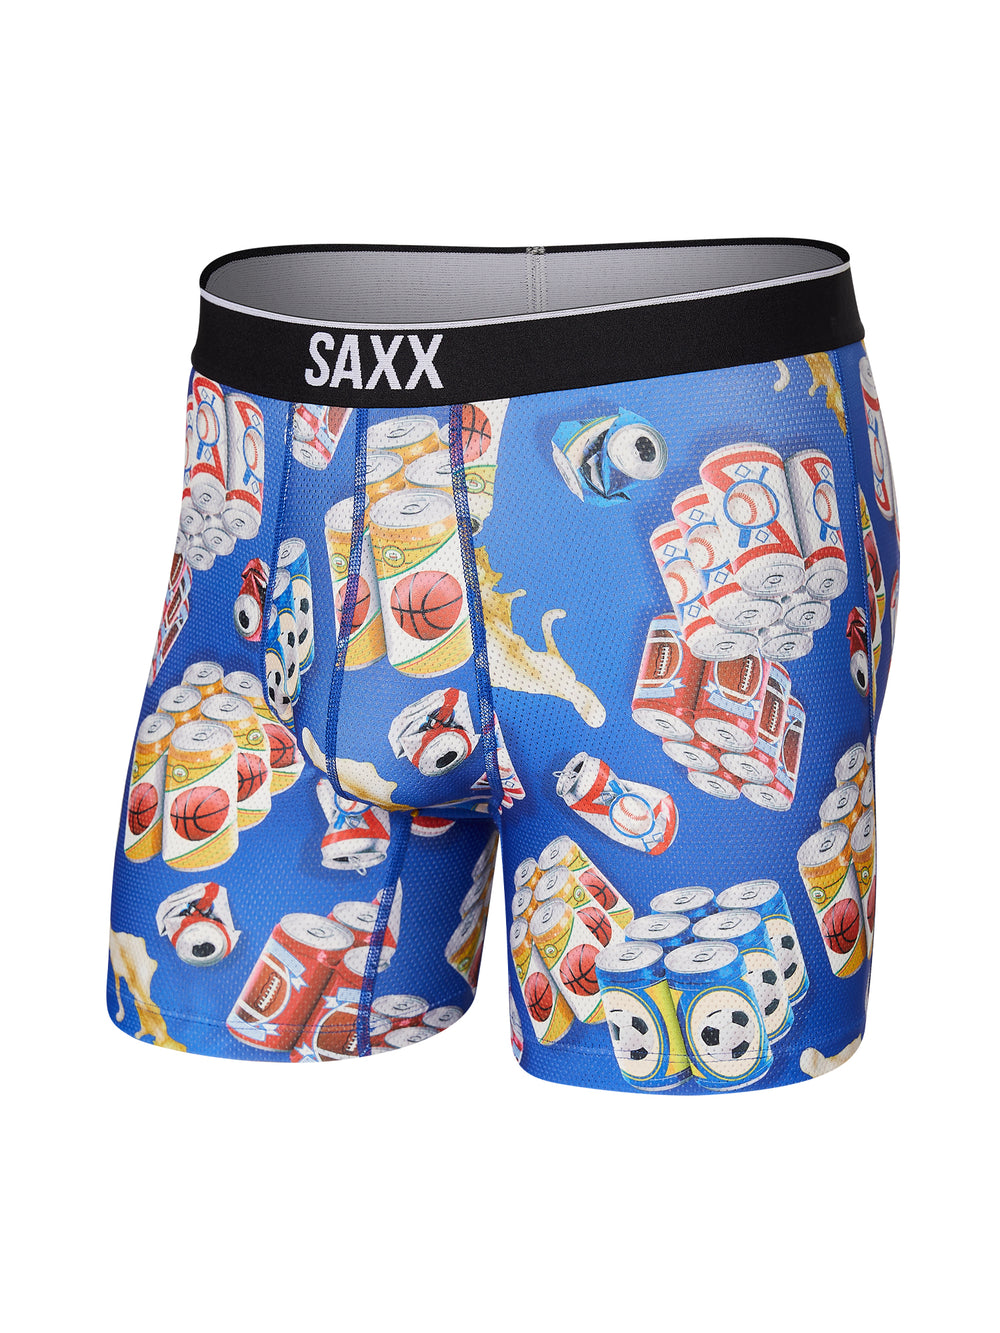 SAXX VOLT BOXER BRIEFING - SIX PACK SPORT BEER